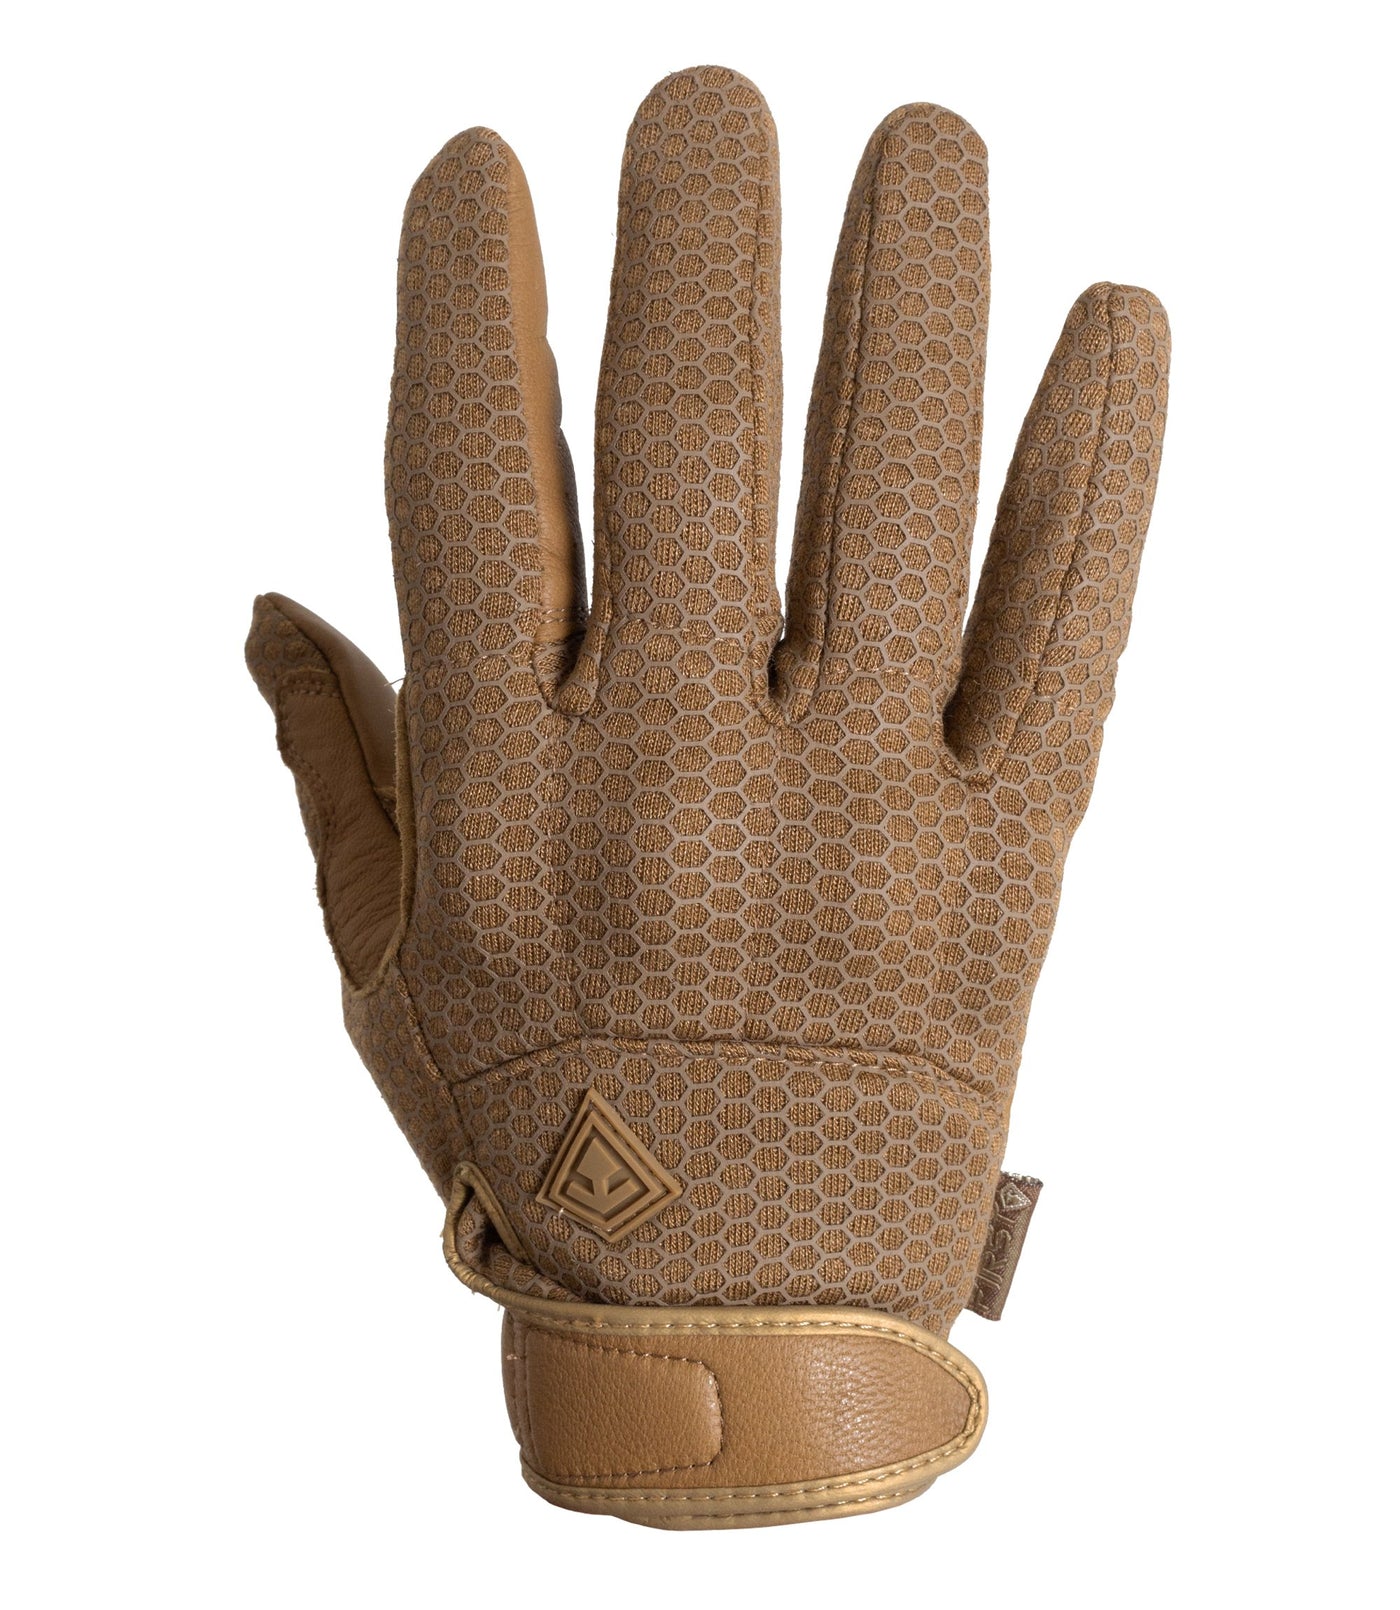 First Tactical - Men's Slash & Flash Protective Knuckle Glove Coyote / XXL